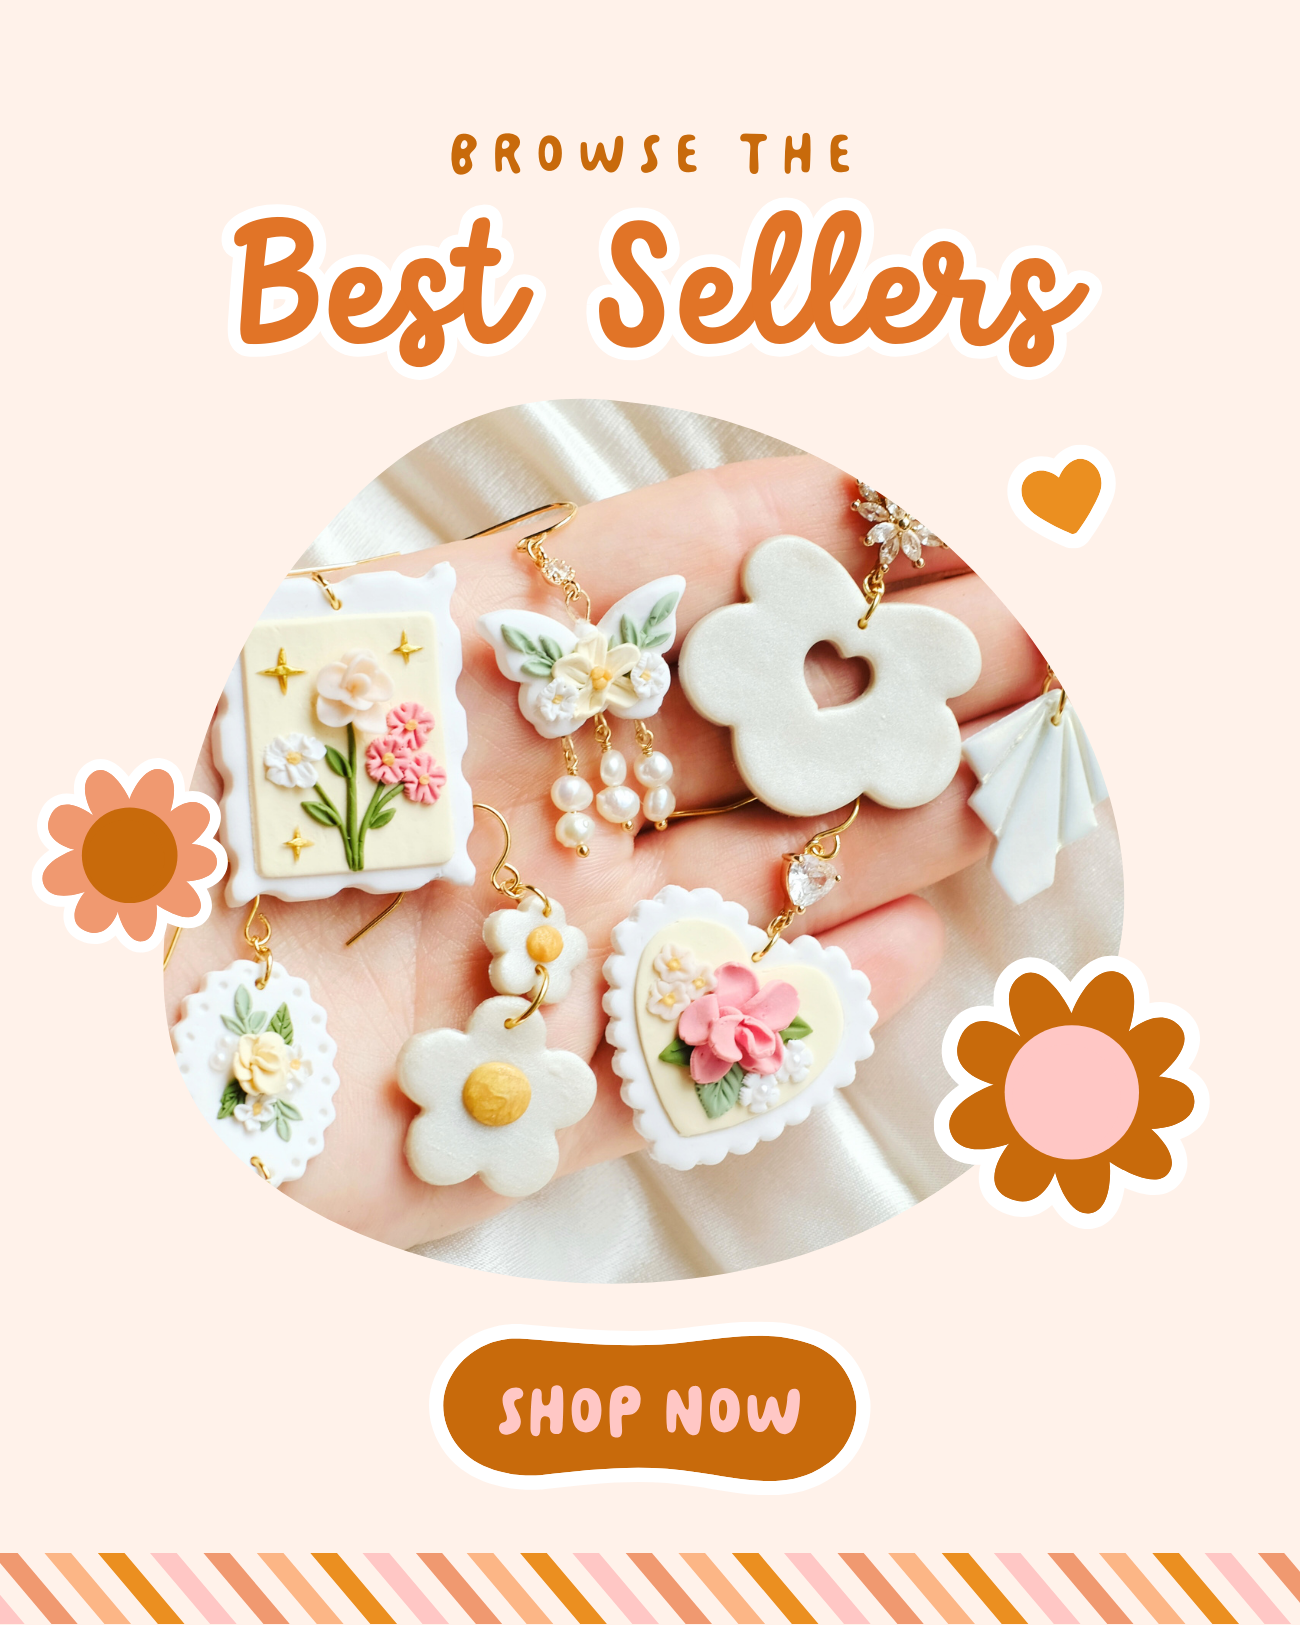 Browse the best sellers from my permanent collection! Many pairs to choose from, including floral stamp earrings, scalloped heart earrings with flowers, and butterfly earrings with dangling pear charms.